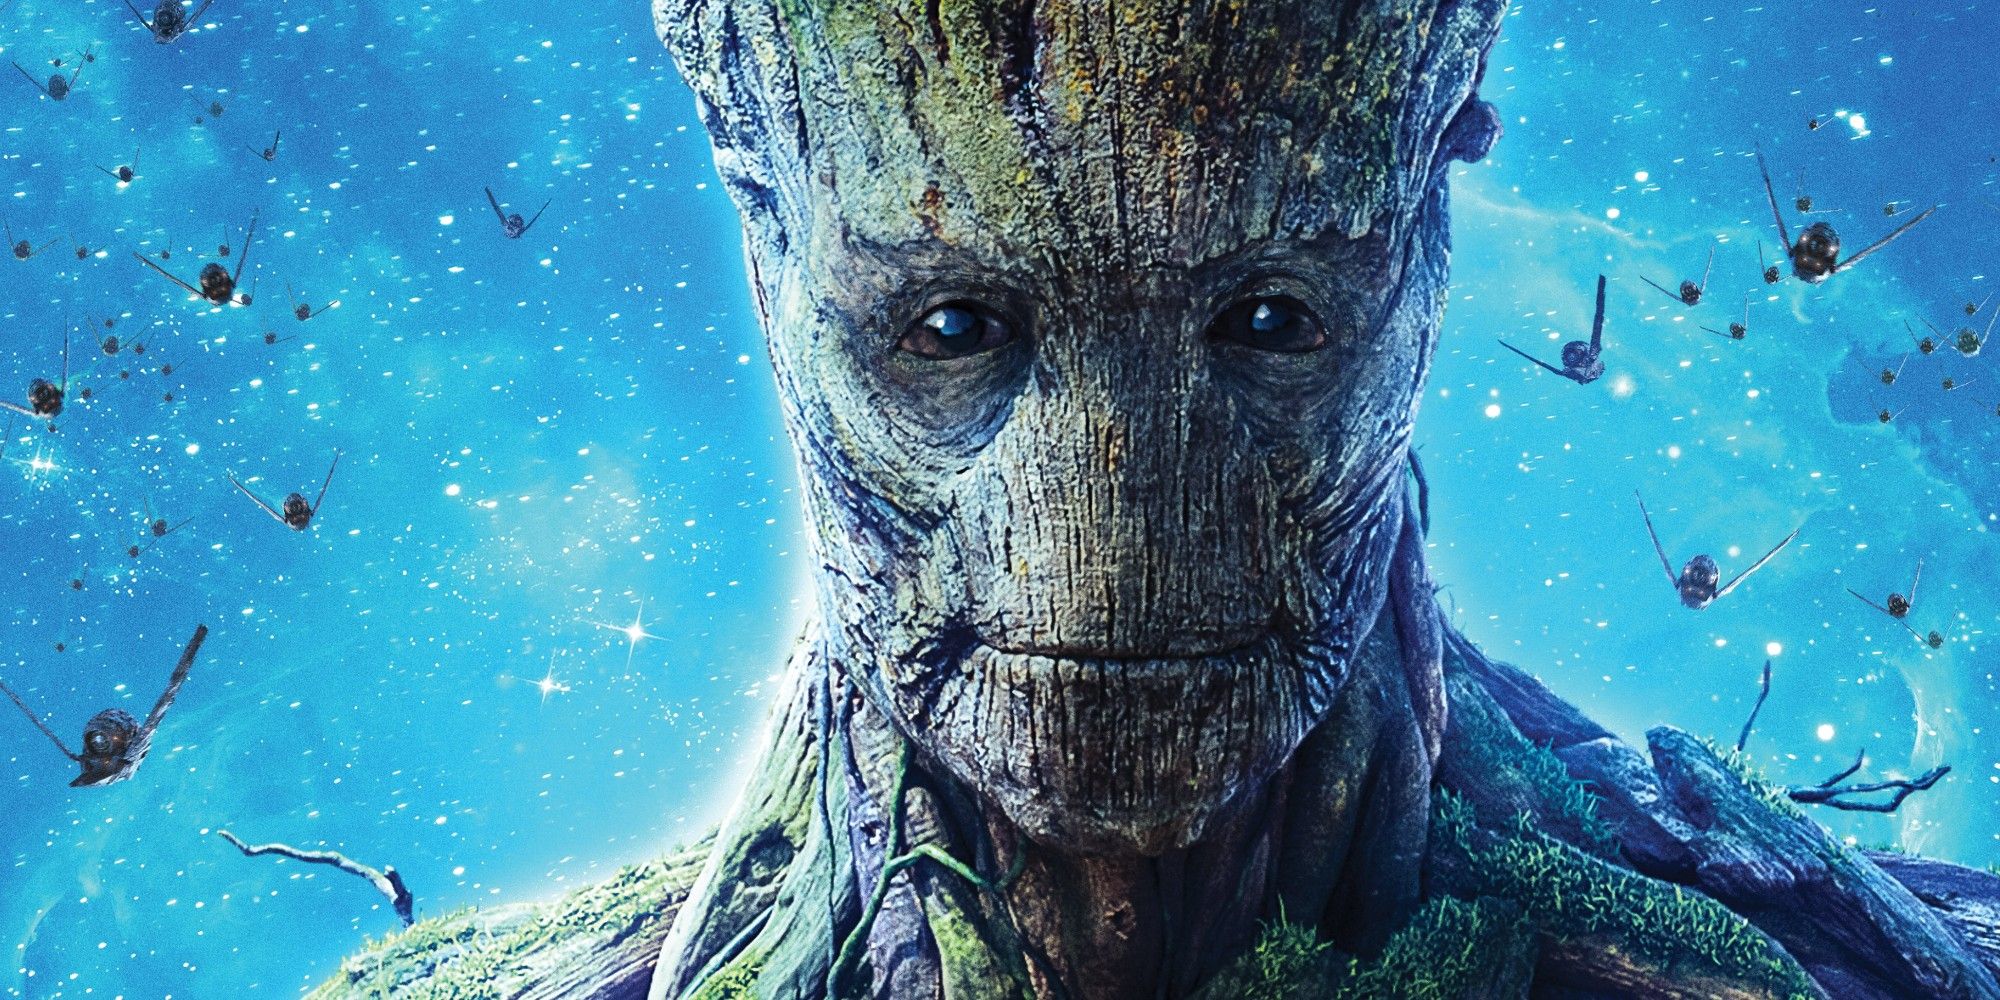 Groot looks on sternly from Guardians of the Galaxy 